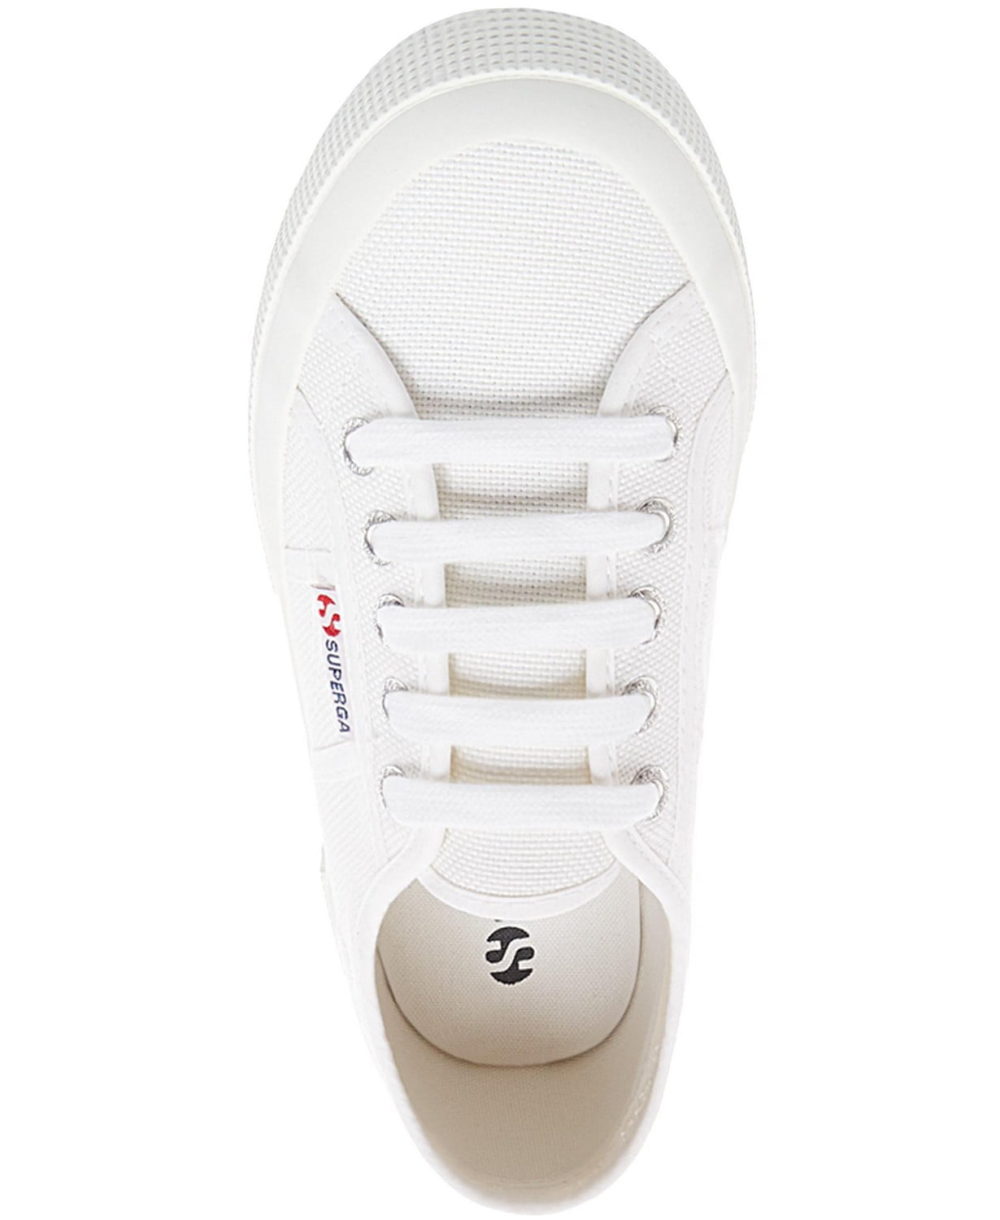 woocommerce-673321-2209615.cloudwaysapps.com-superga-womens-white-canvas-lace-up-low-top-sneakers